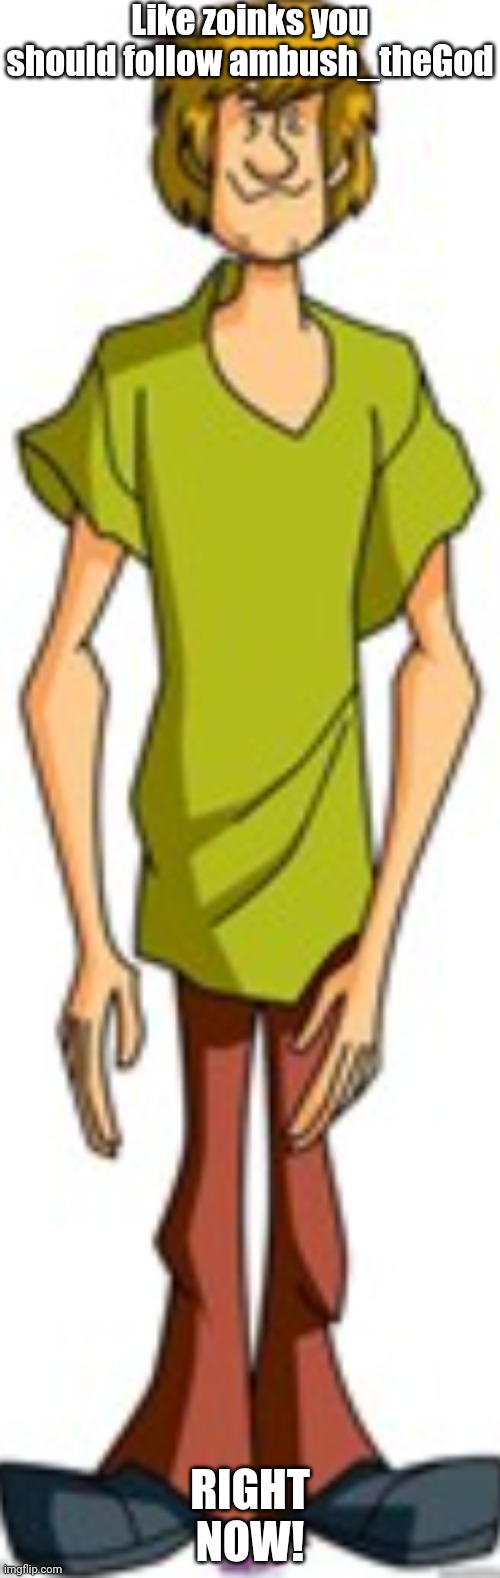 Shaggy Standing | Like zoinks you should follow ambush_theGod; RIGHT NOW! | image tagged in shaggy standing | made w/ Imgflip meme maker